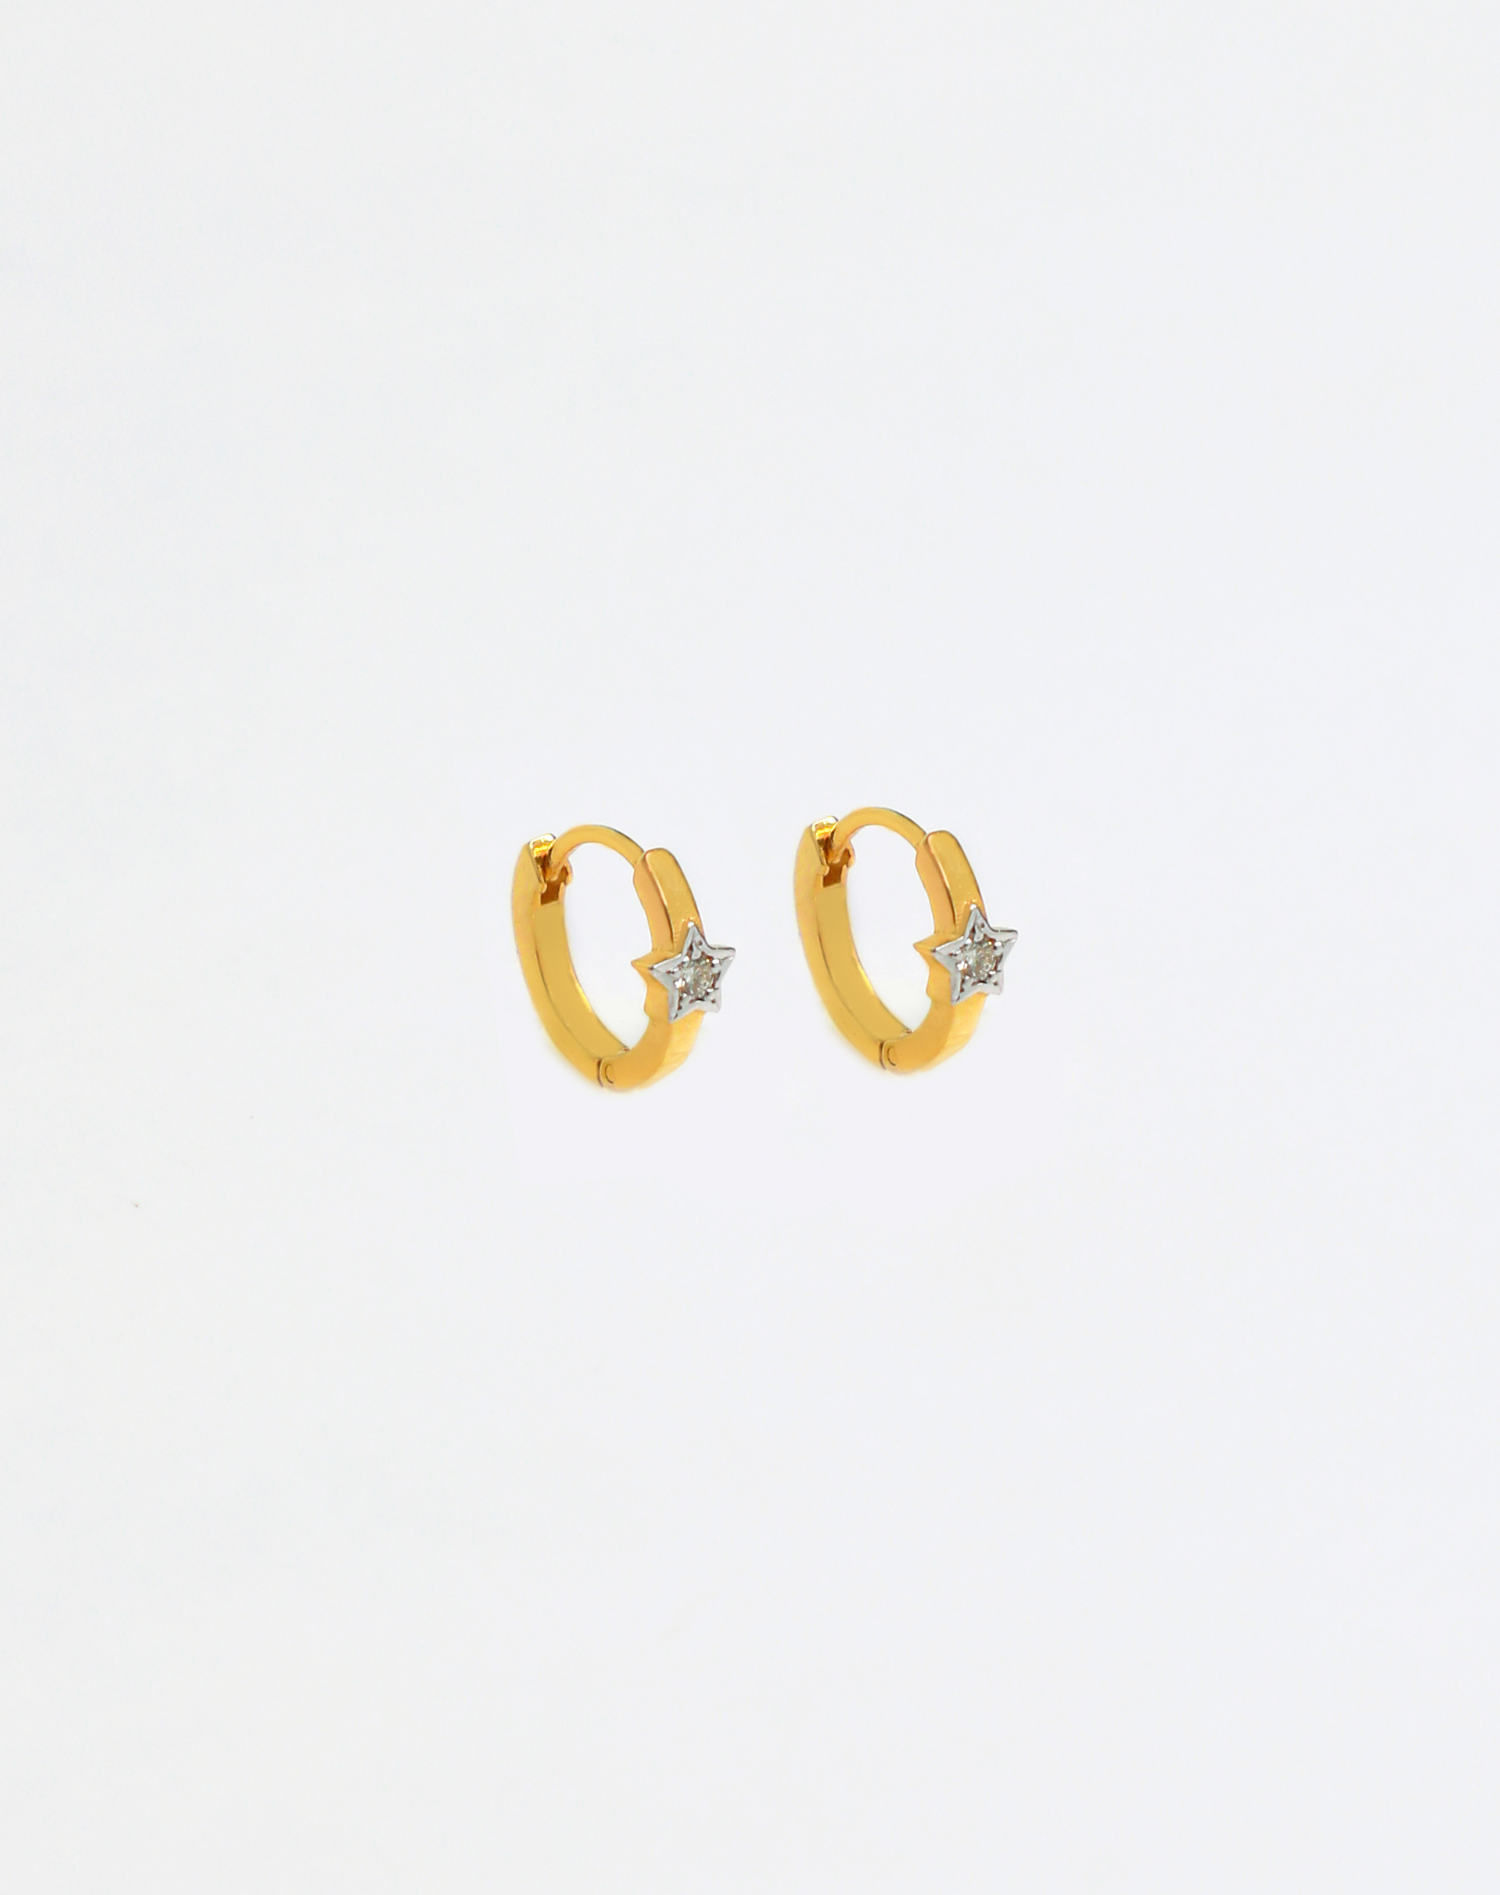 Buy MALABAR GOLD AND DIAMONDS Kids Gold Earrings ERMSKD00030 | Shoppers Stop